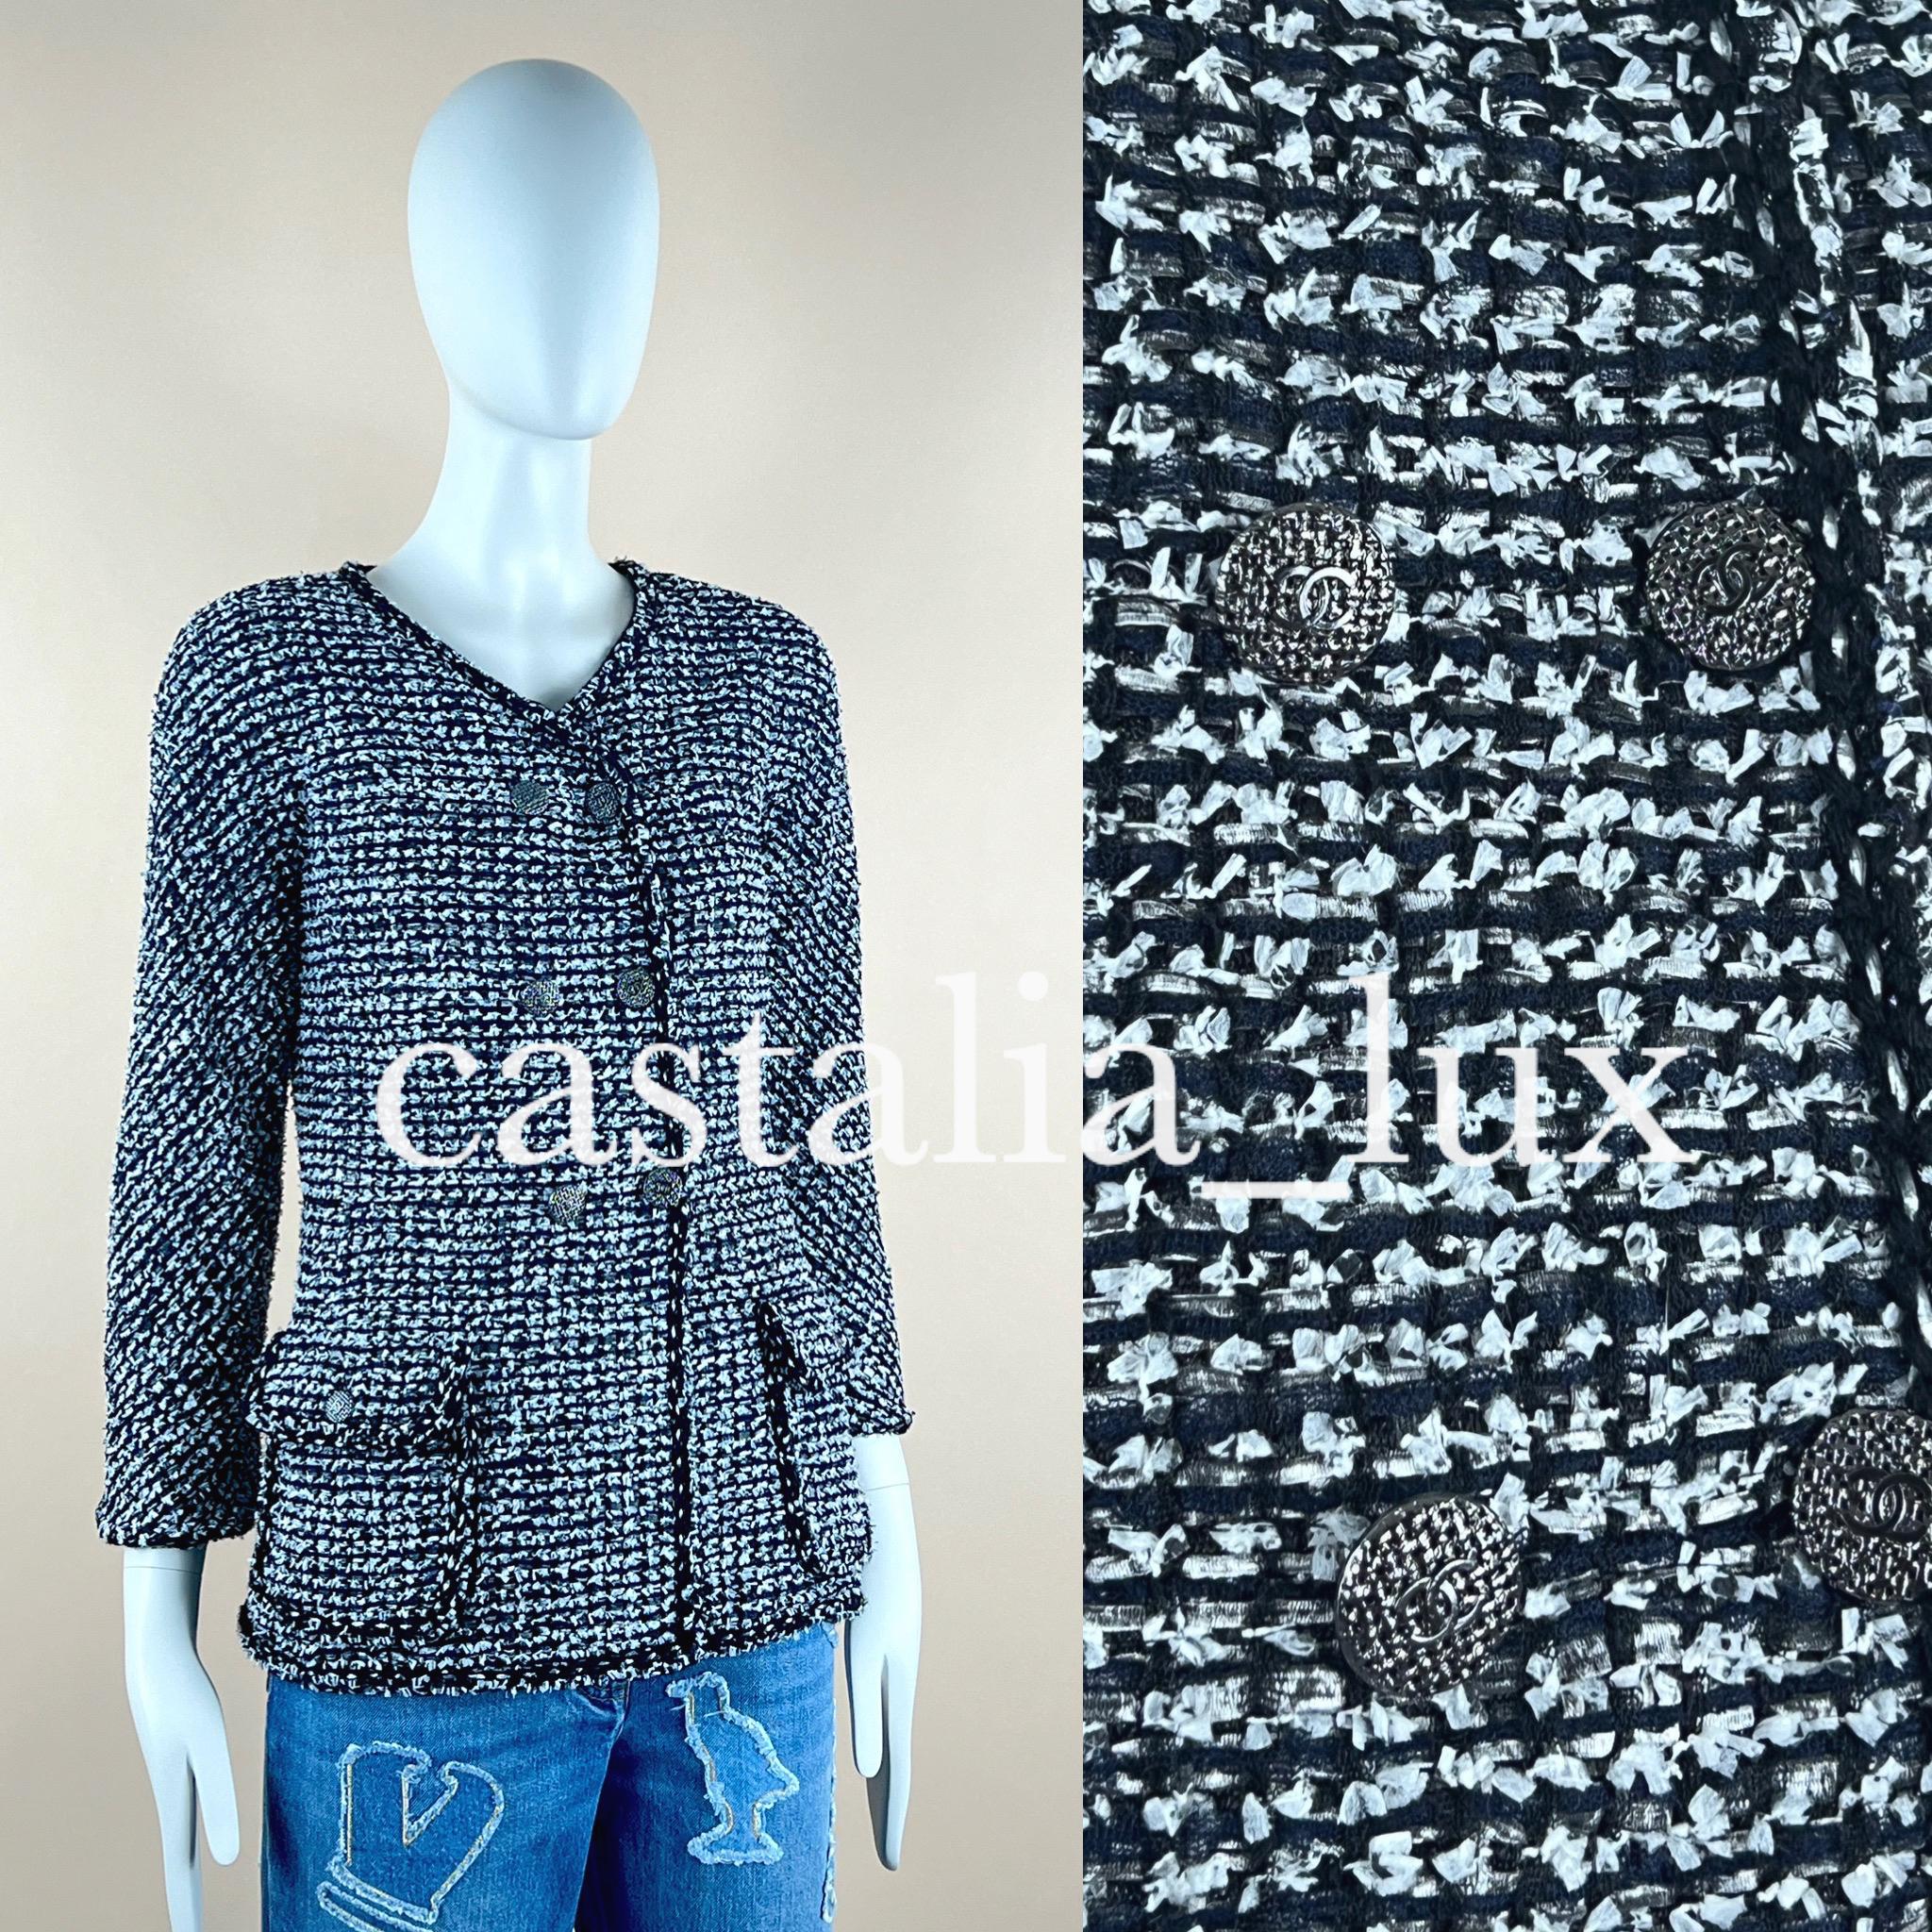 Fabulous Chanel lesage tweed jacket with double rows of CC buttons from 2015 Spring Collection.
Size mark 34 FR. Condition is pristine.
- signature braided trim
- two flap pockets
- tonal silk lining, chain link at interior hem